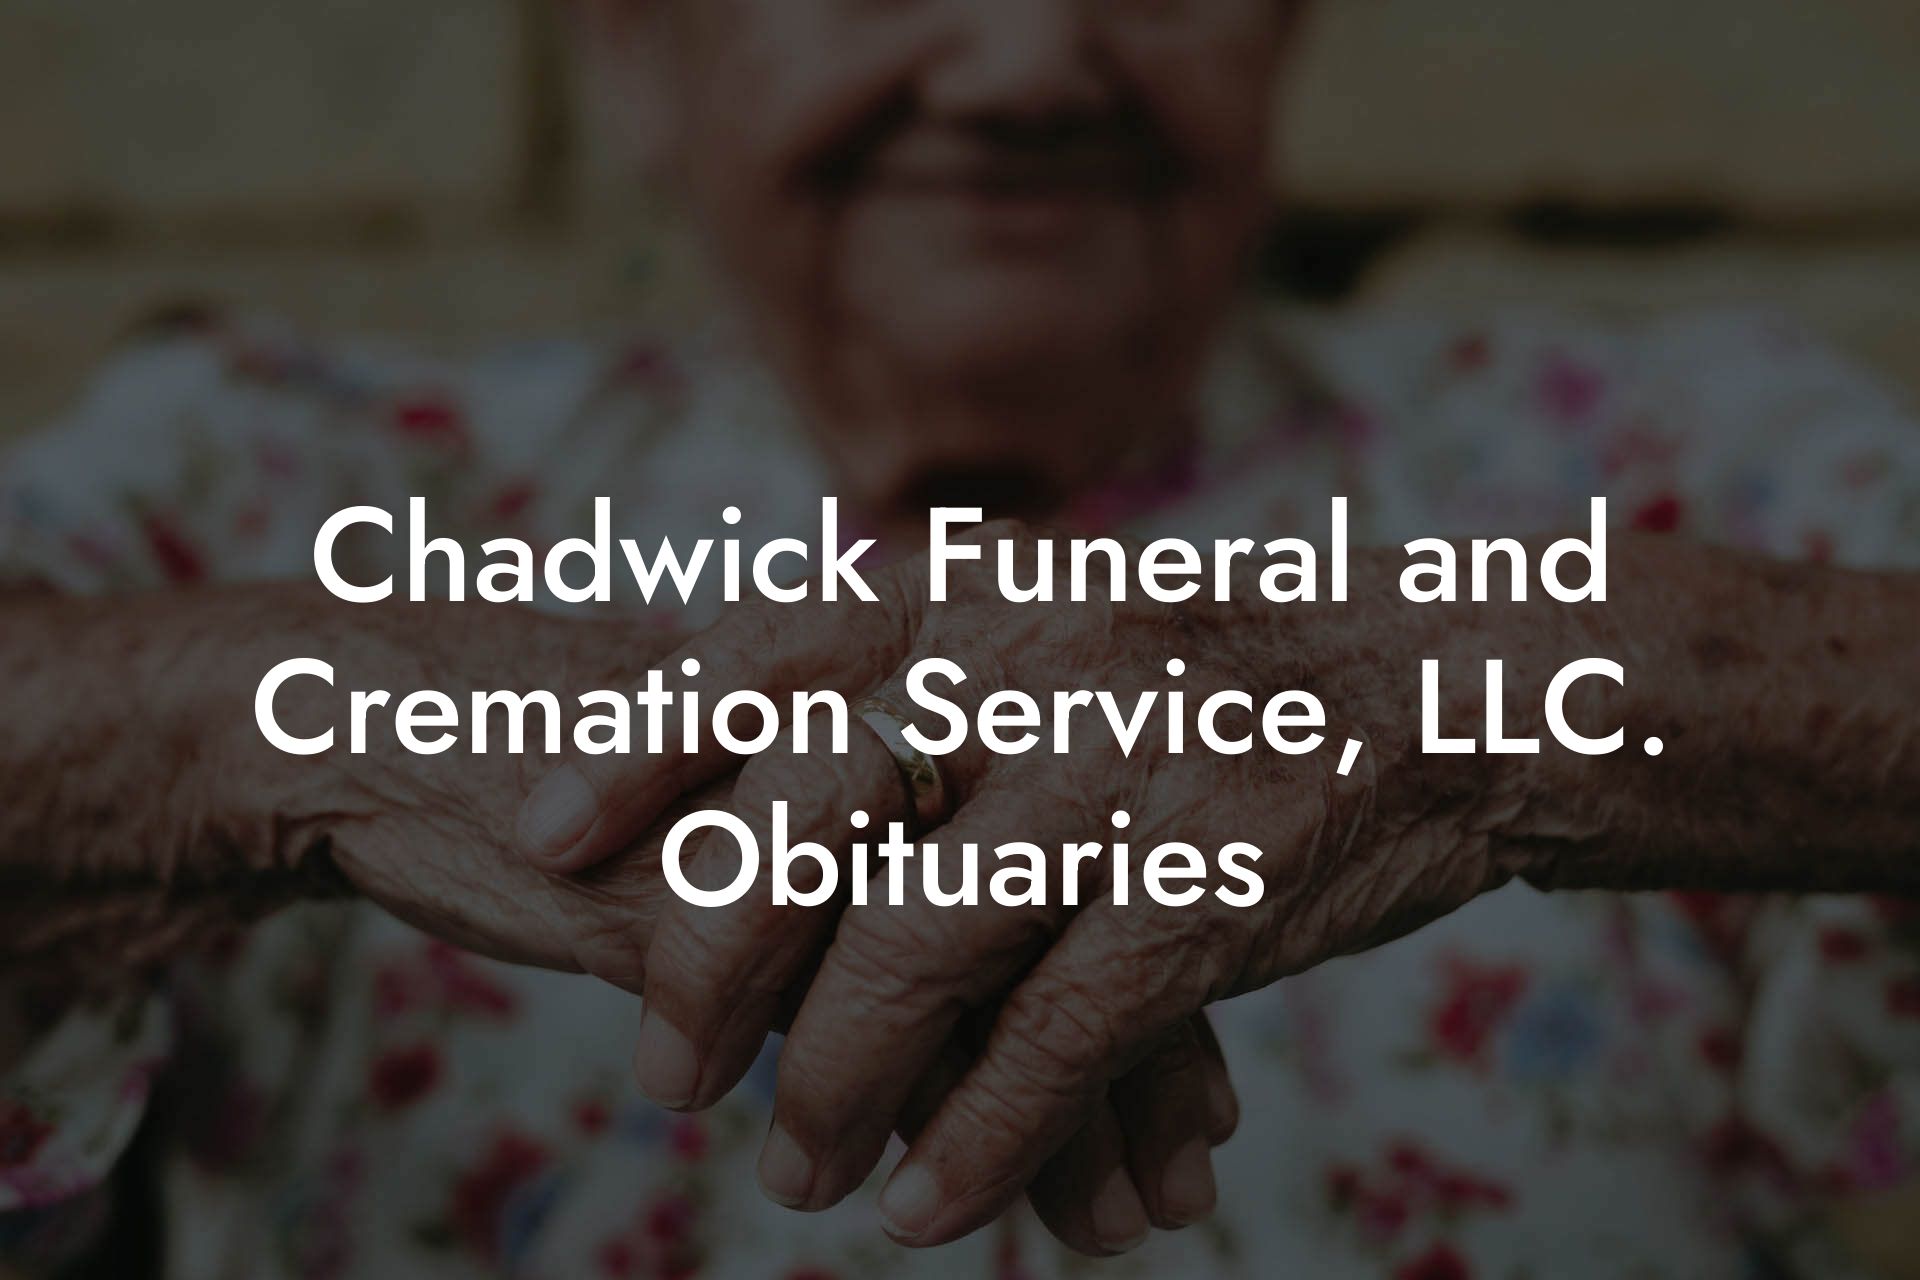 Chadwick Funeral and Cremation Service, LLC. Obituaries